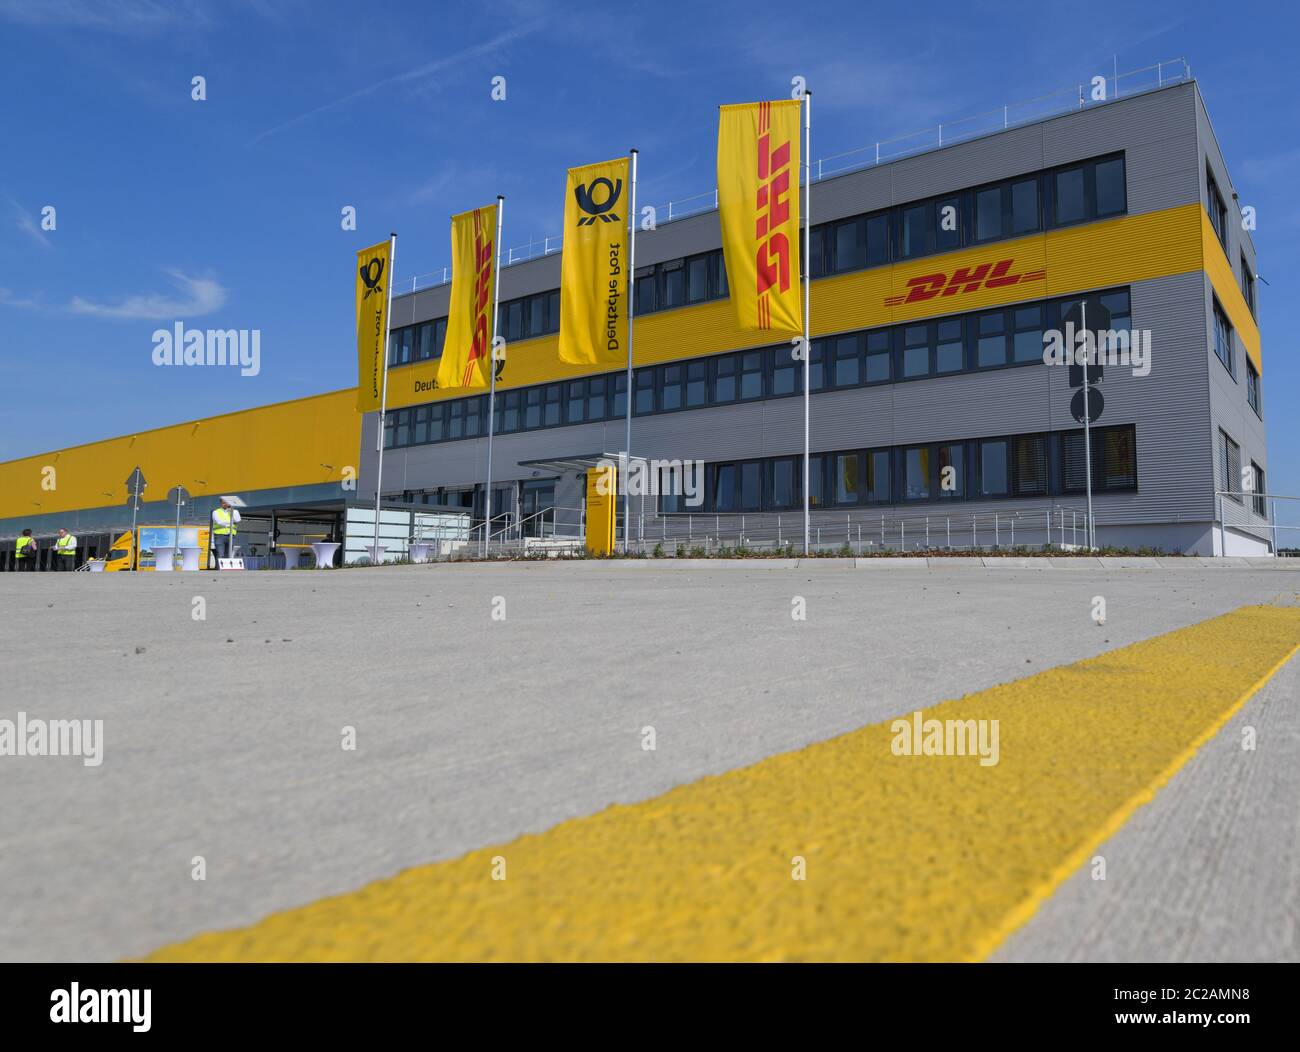 Ludwigsfelde, Germany. 17th June, 2020. Flags are waving in front of the new parcel centre of the Deutsche Post. On the same day, the first construction phase was completed with the completion of the shell for the new parcel centre. In future, up to 50,000 parcels per hour will be sorted in the parcel centre. According to the company, the third DHL 'mega parcel centre' in Germany and one of the most modern in Europe is being built on around 165,000 square metres. More than 600 new jobs will be created in the region. Credit: Patrick Pleul/dpa-Zentralbild/dpa/Alamy Live News Stock Photo